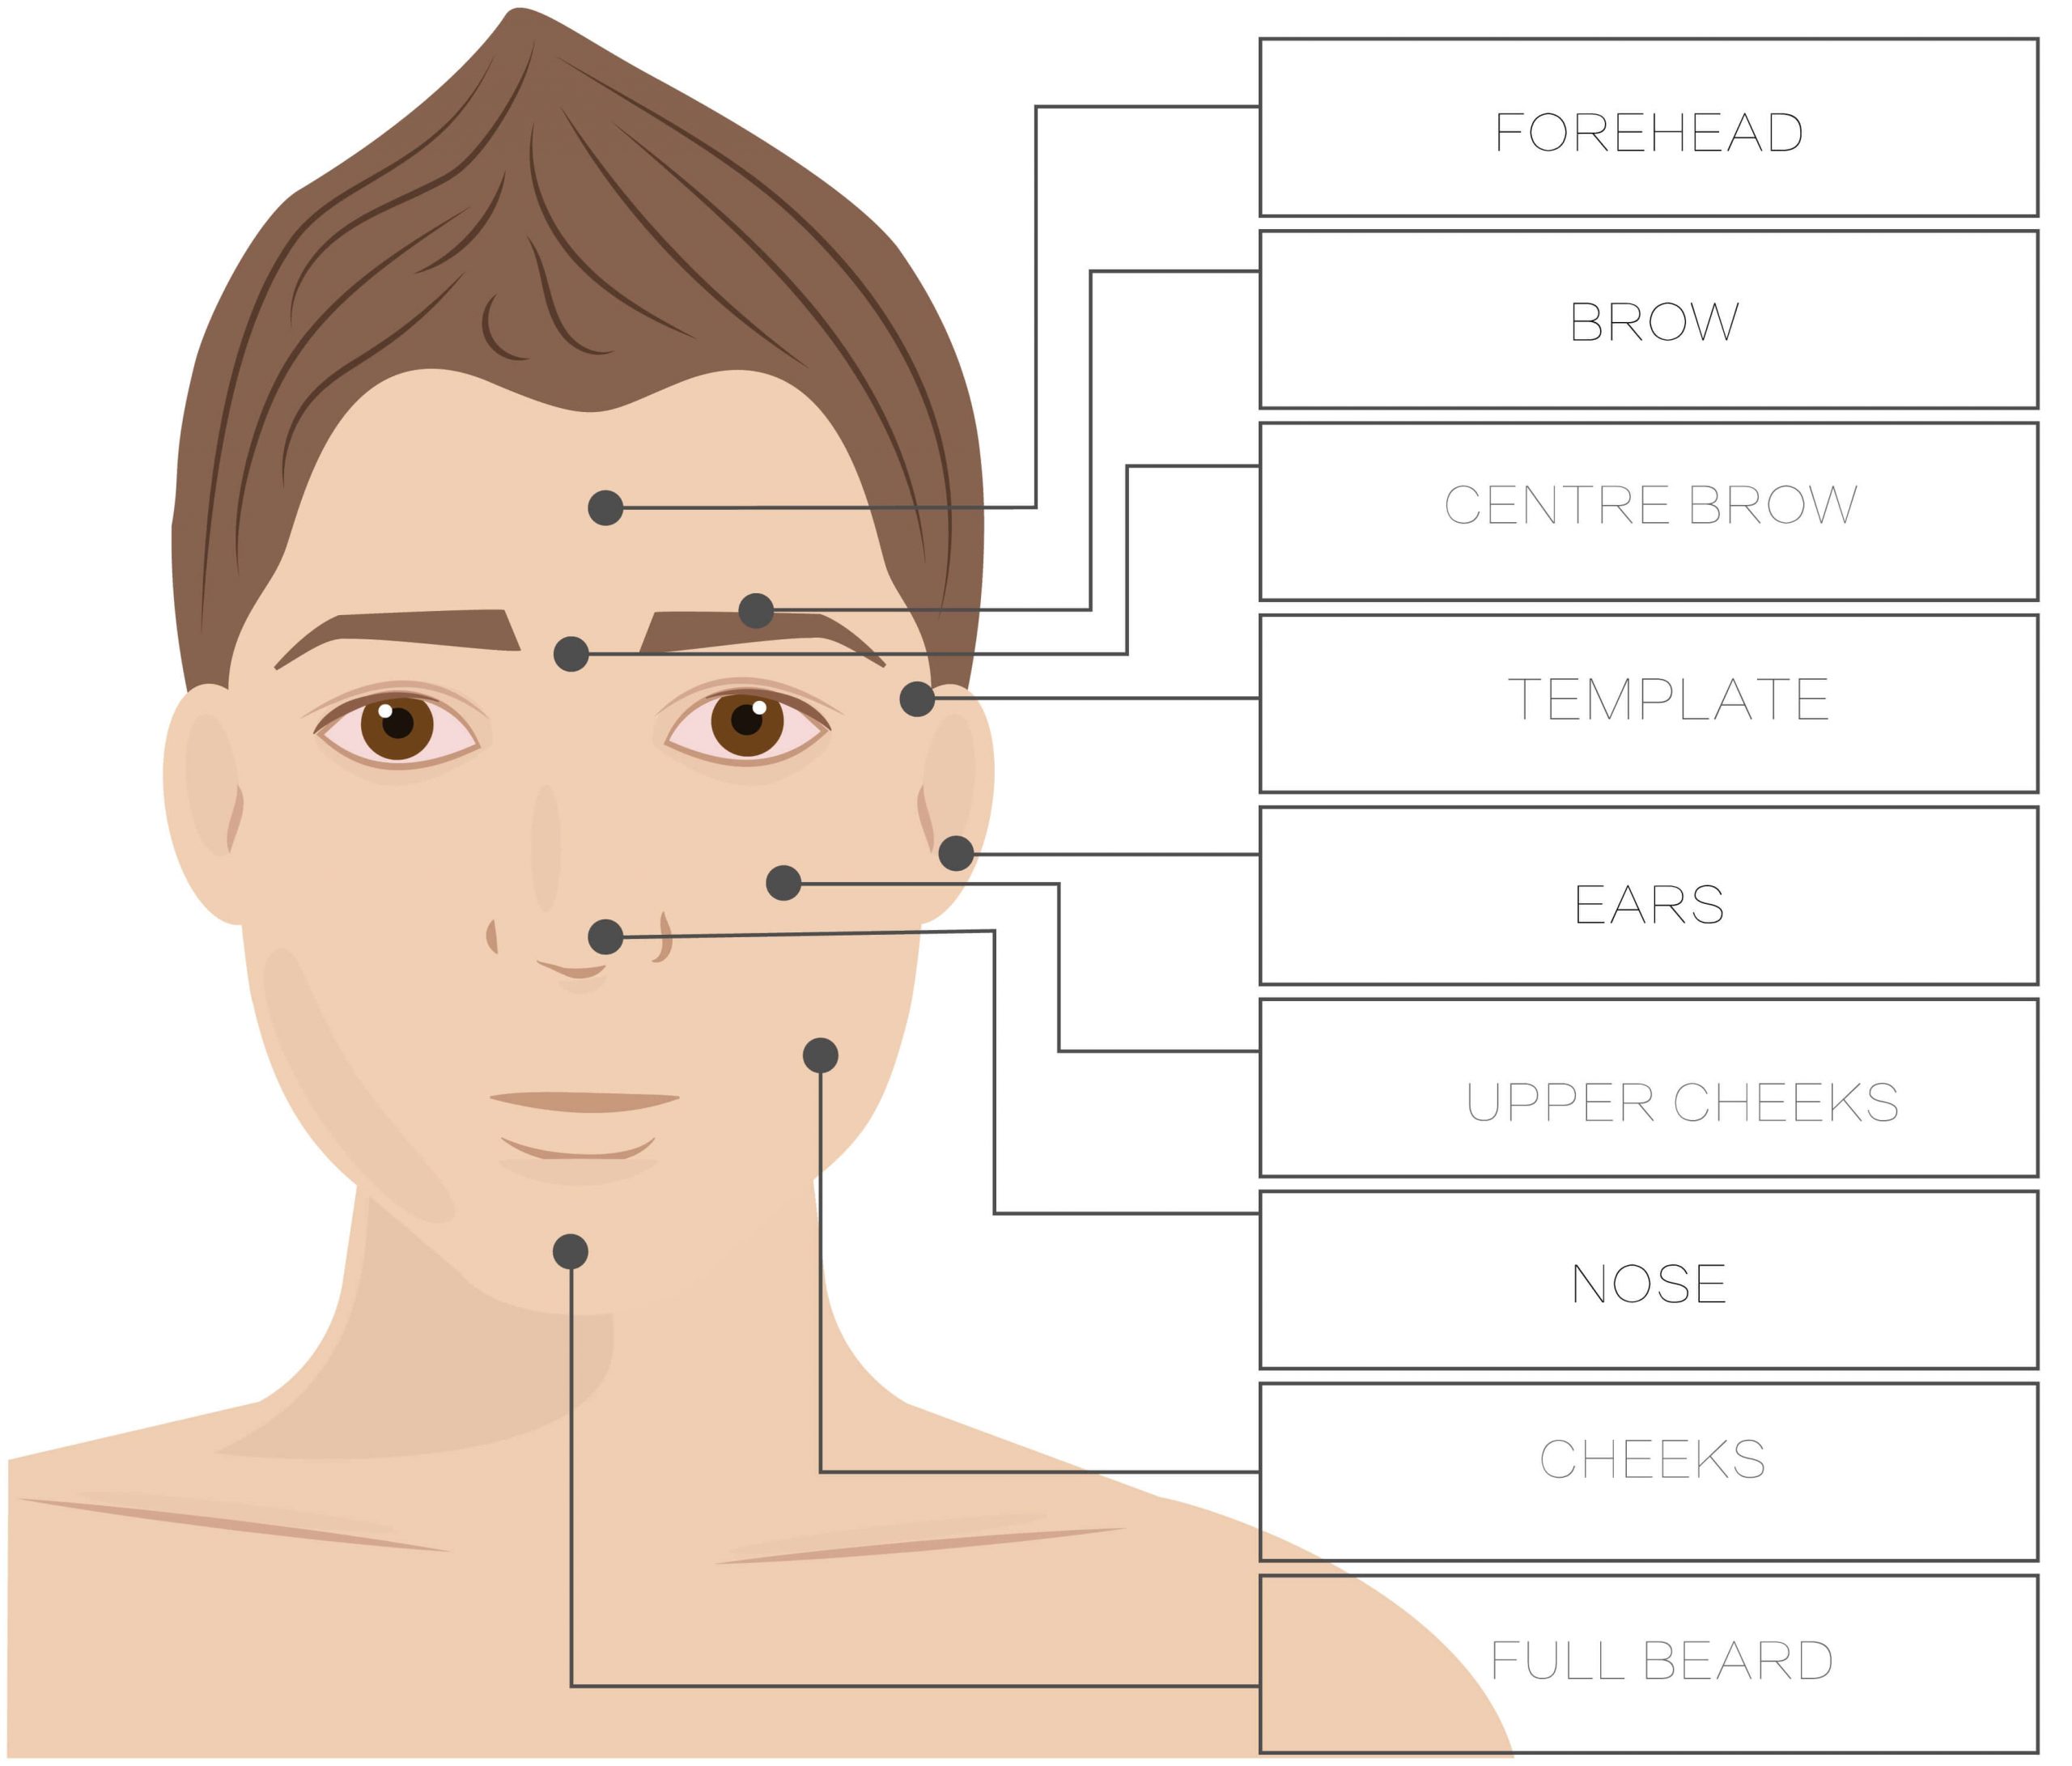 Top 48 image how to facial hair remove - Thptnganamst.edu.vn